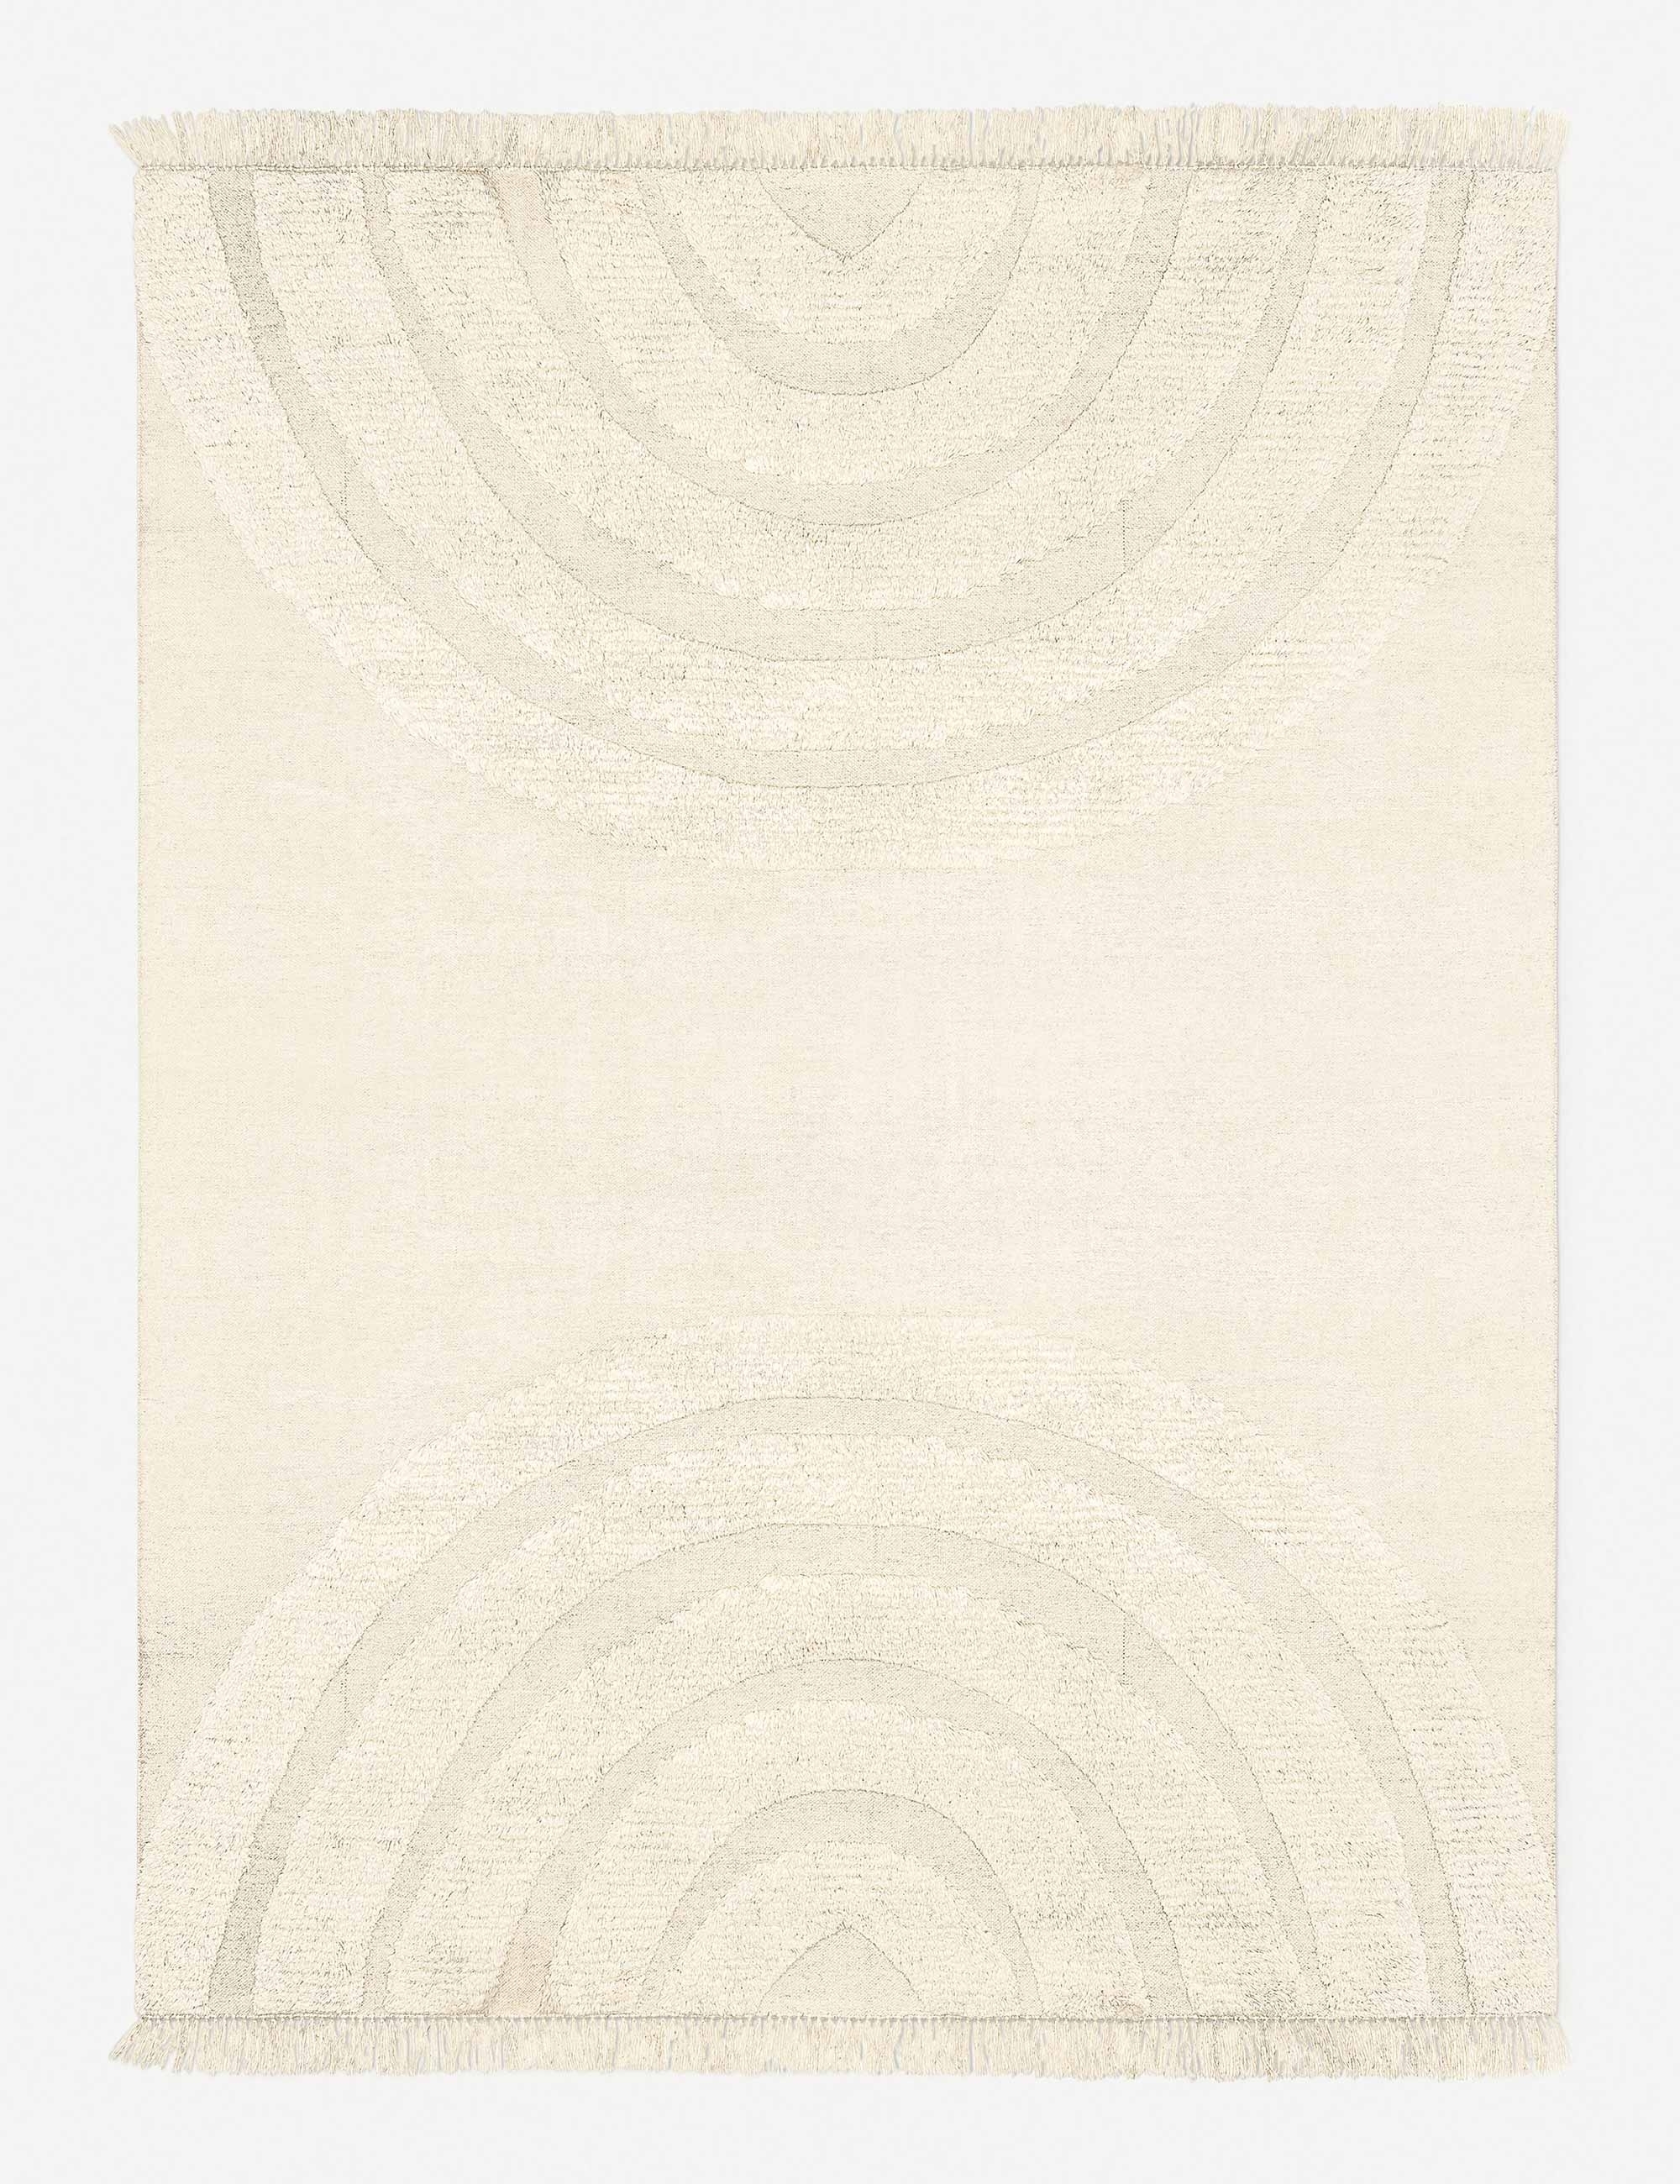 Arches Hand-Knotted Wool Rug by Sarah Sherman Samuel - Image 9